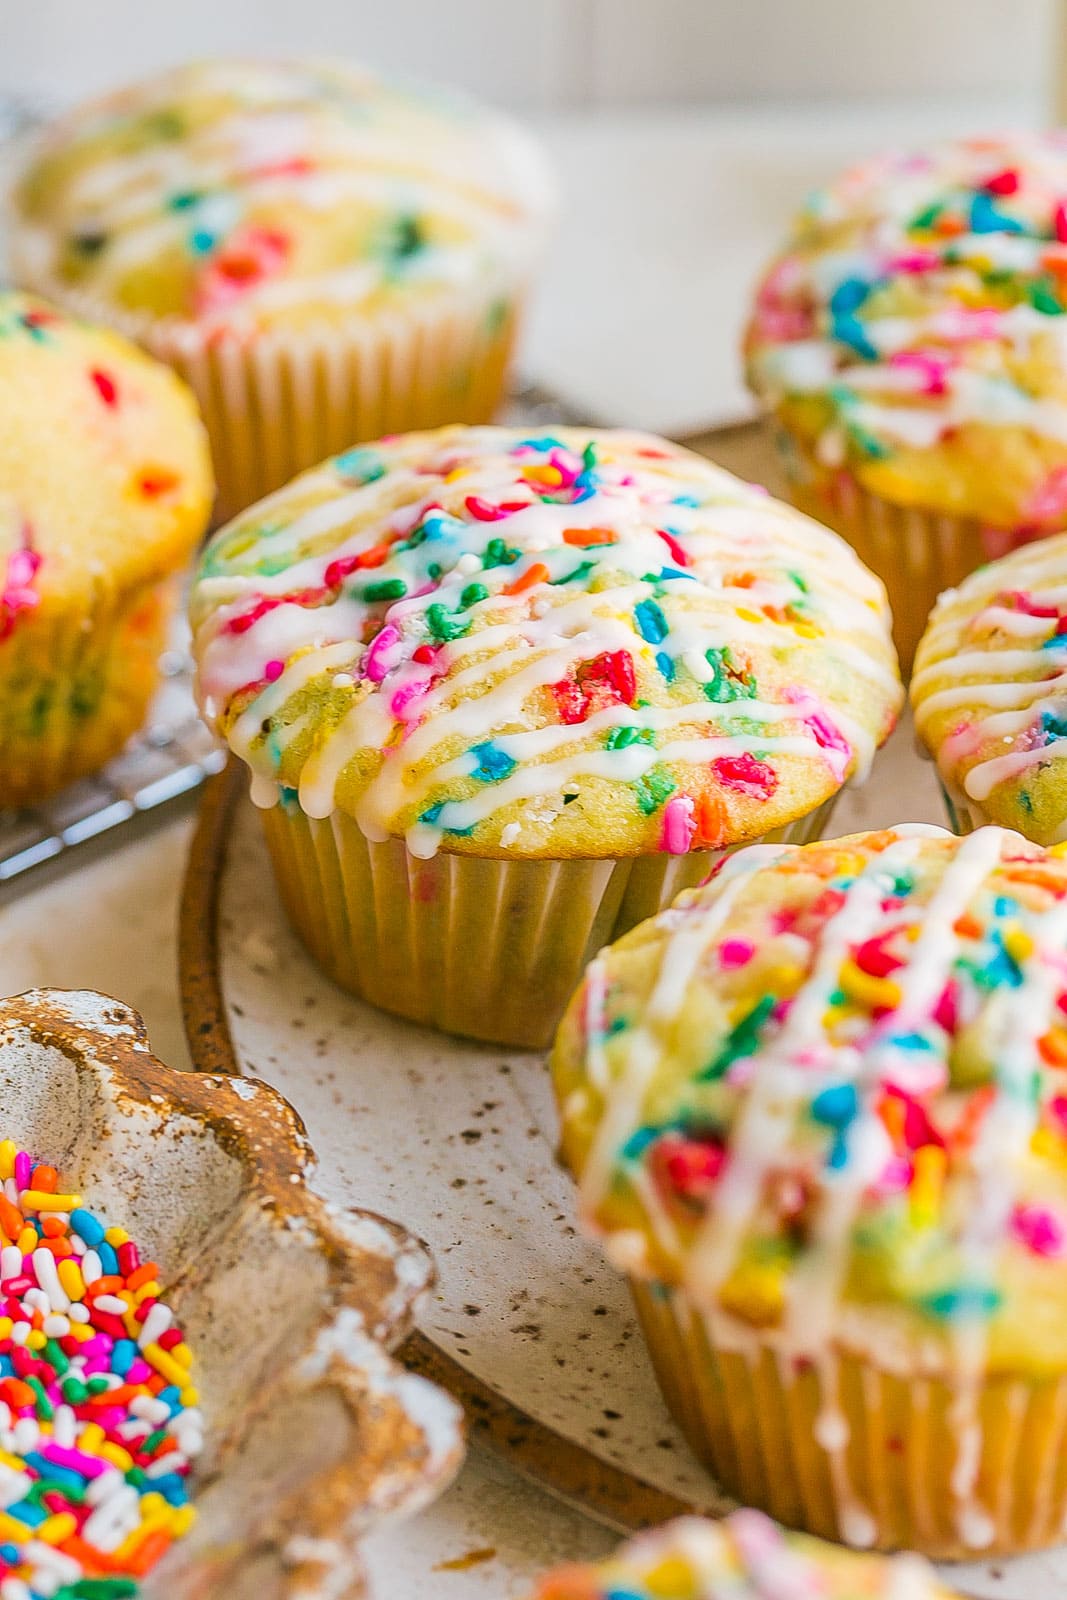 Side view of muffin with rainbow sprinkles.